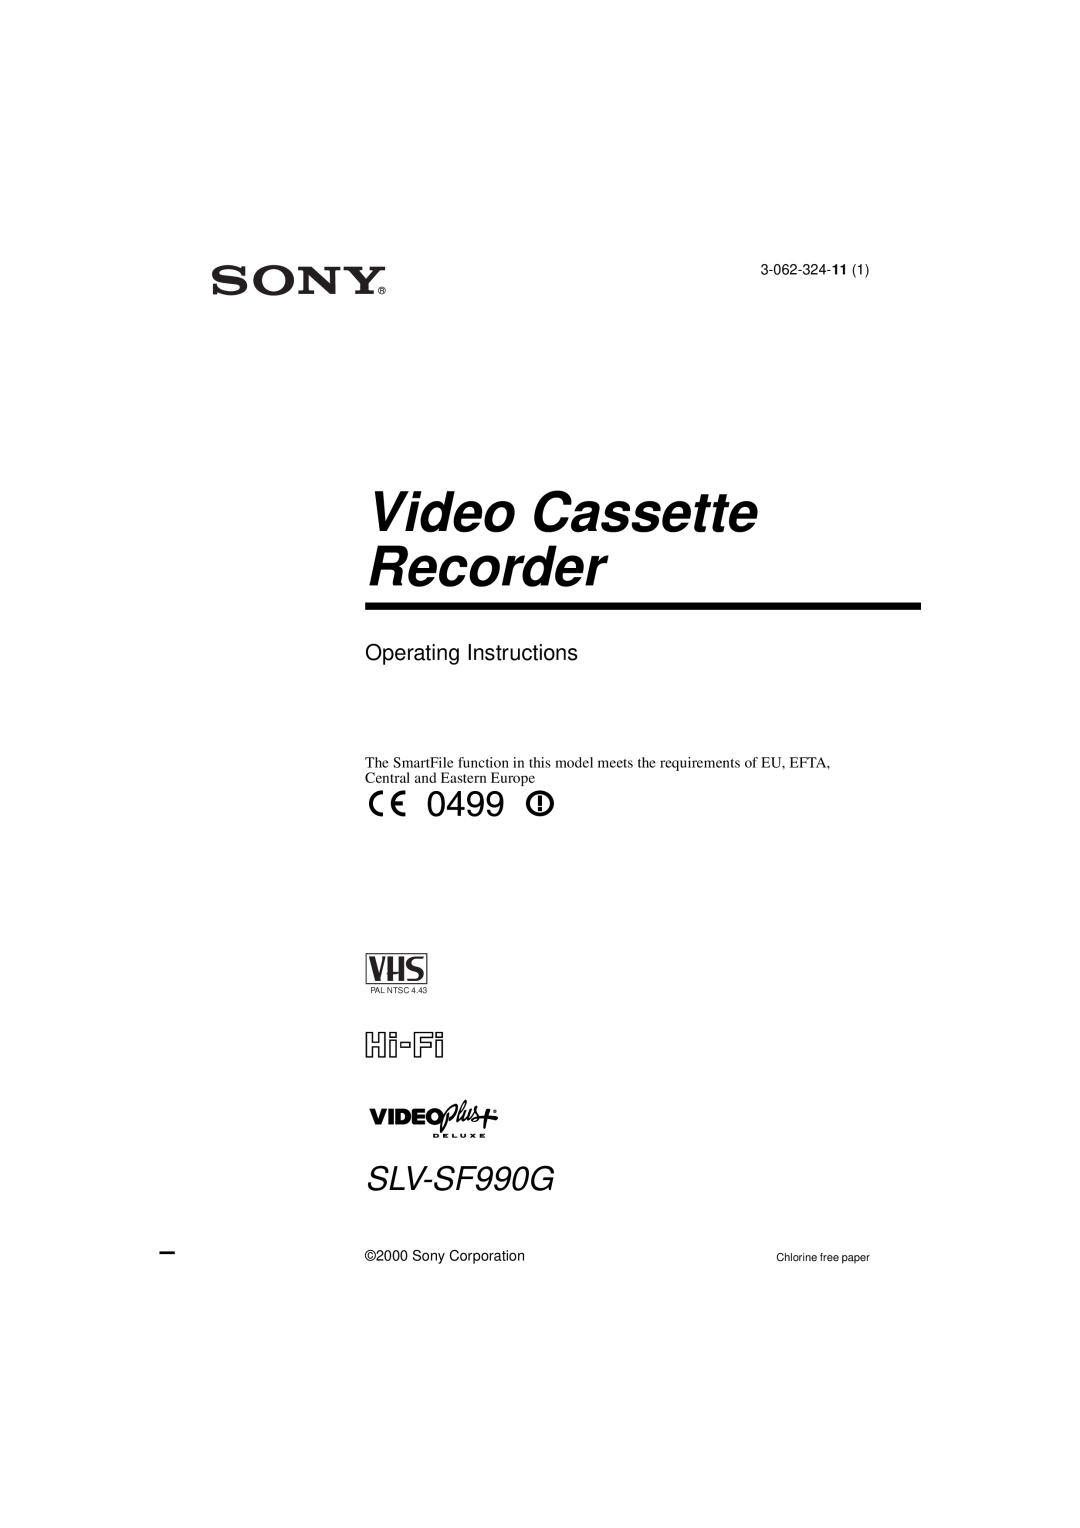 Sony SLV-SF990G manual Video Cassette Recorder, Operating Instructions, 3-062-324-11, Sony Corporation, Pal Ntsc 